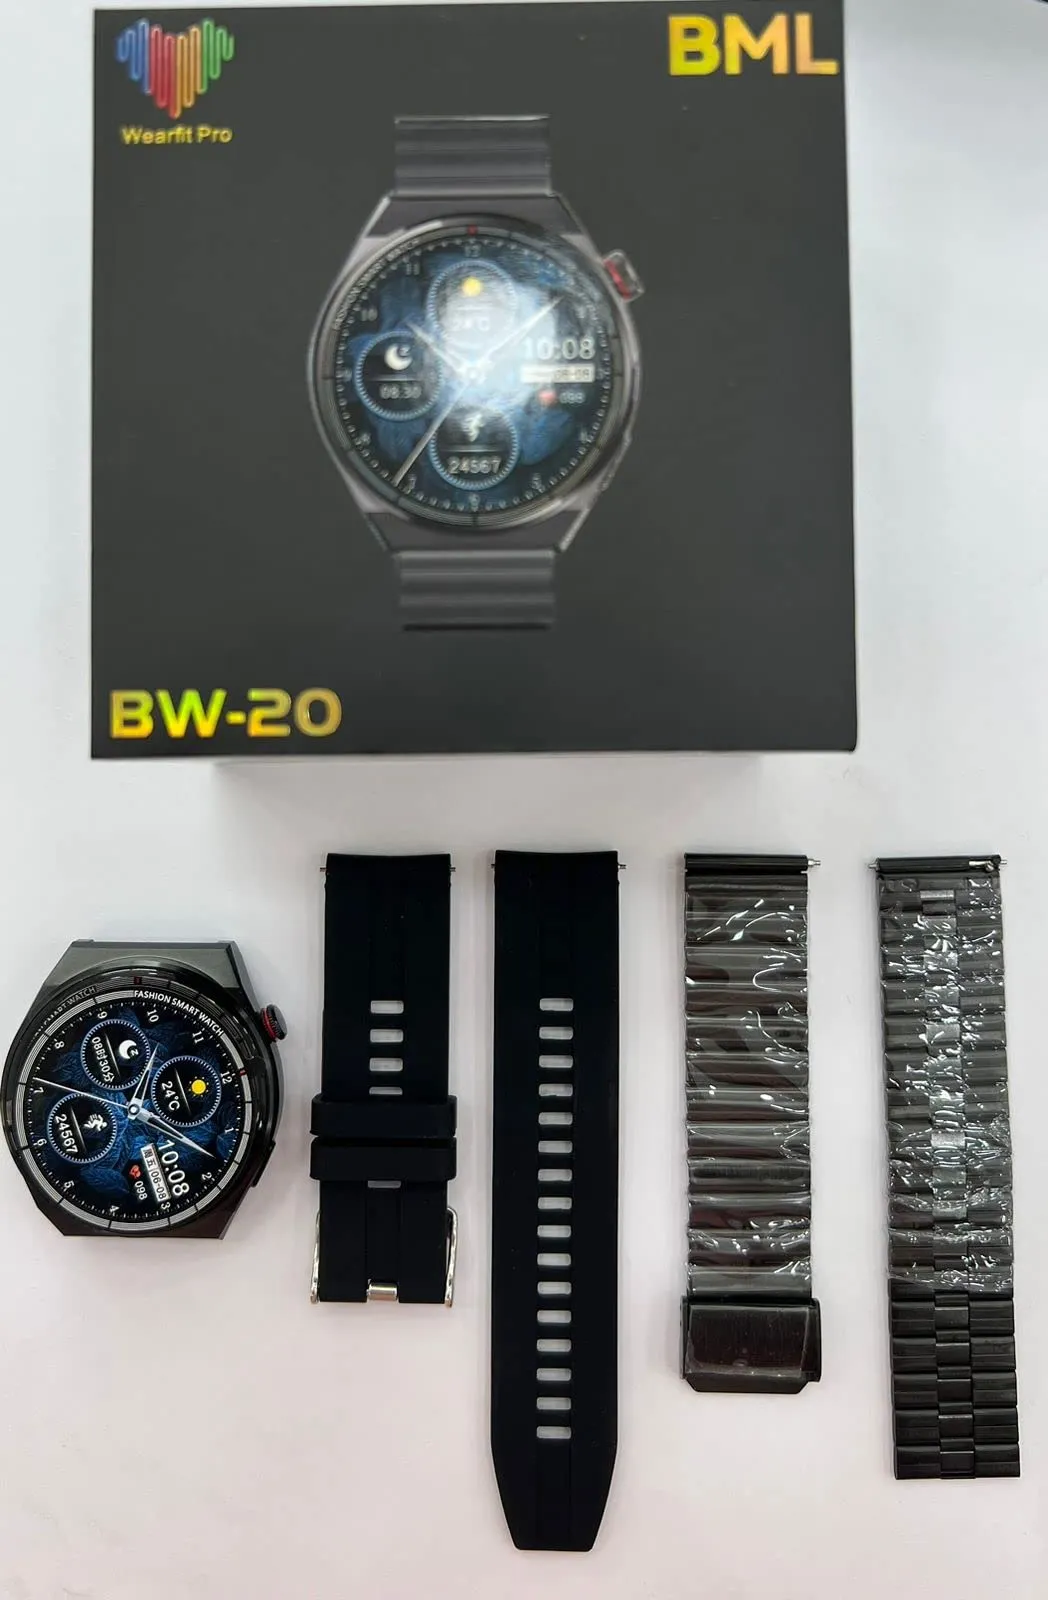 Buy Bw 20 Smart Watch at best prices in Pakistan|Rhizmall.pk